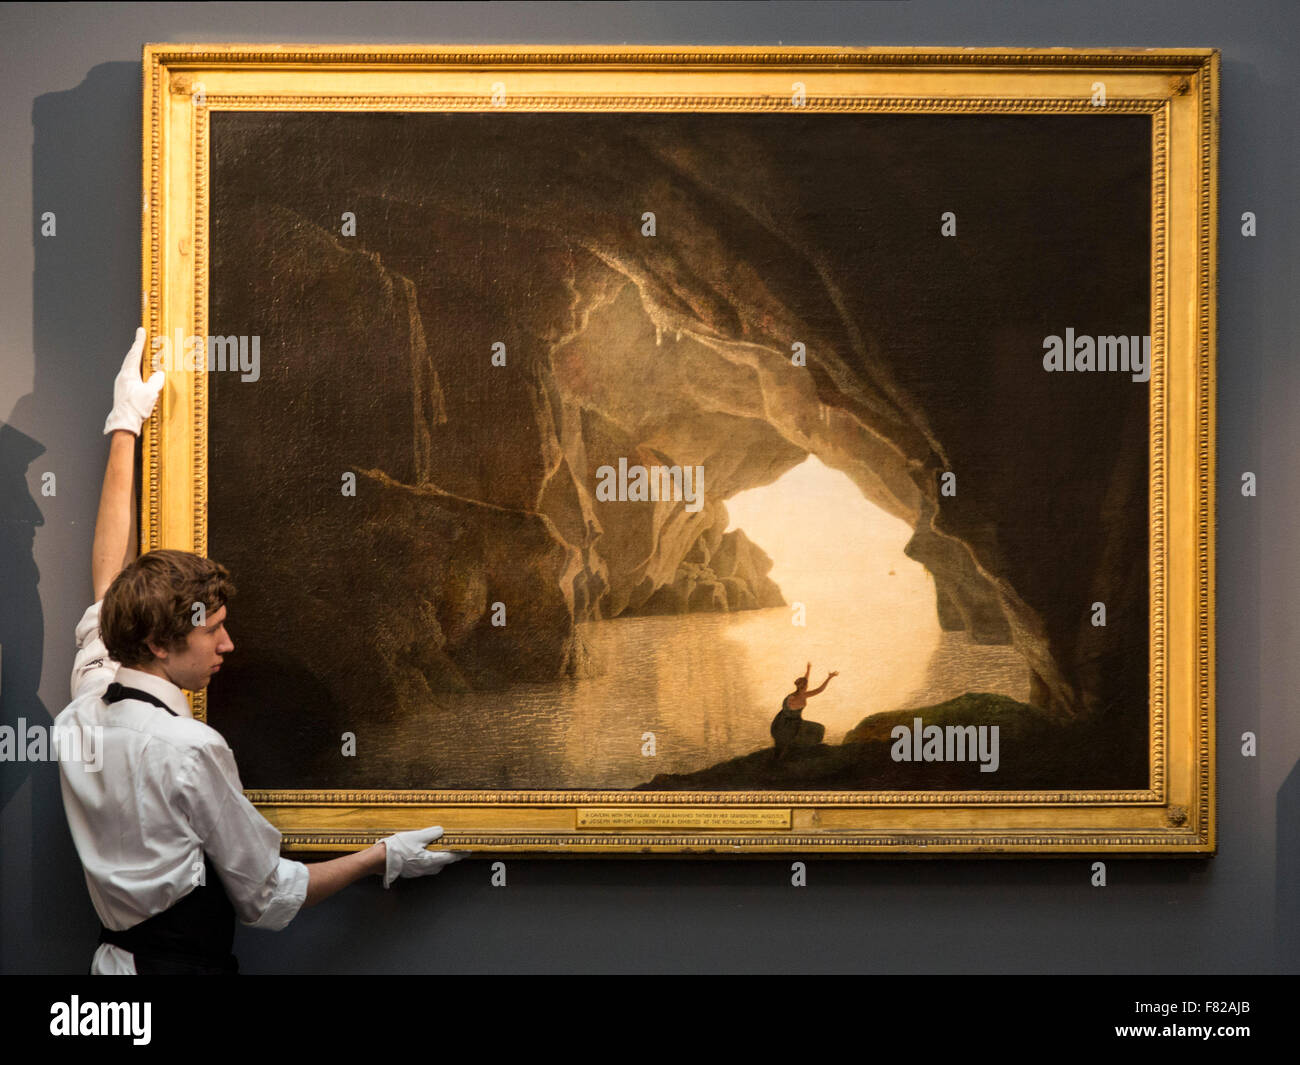 London, UK. 4 December 2015. Pictured: A grotto in the Gulf of Salerno with the figure of Julia, banished from Rome by Joseph Wright of Derby, estimate: GBP 100,000-150,000. This work has been donated to The United Society and will be auction in order to raise funds for the relief of the Syrian refugee crisis in Europe. Press preview of Sotheby's London Evening Sale of Old Master and British Paintings, featuring many museum-quality works kept for centuries in prestigious private collections. The sale takes place on 9 December 2015. Stock Photo